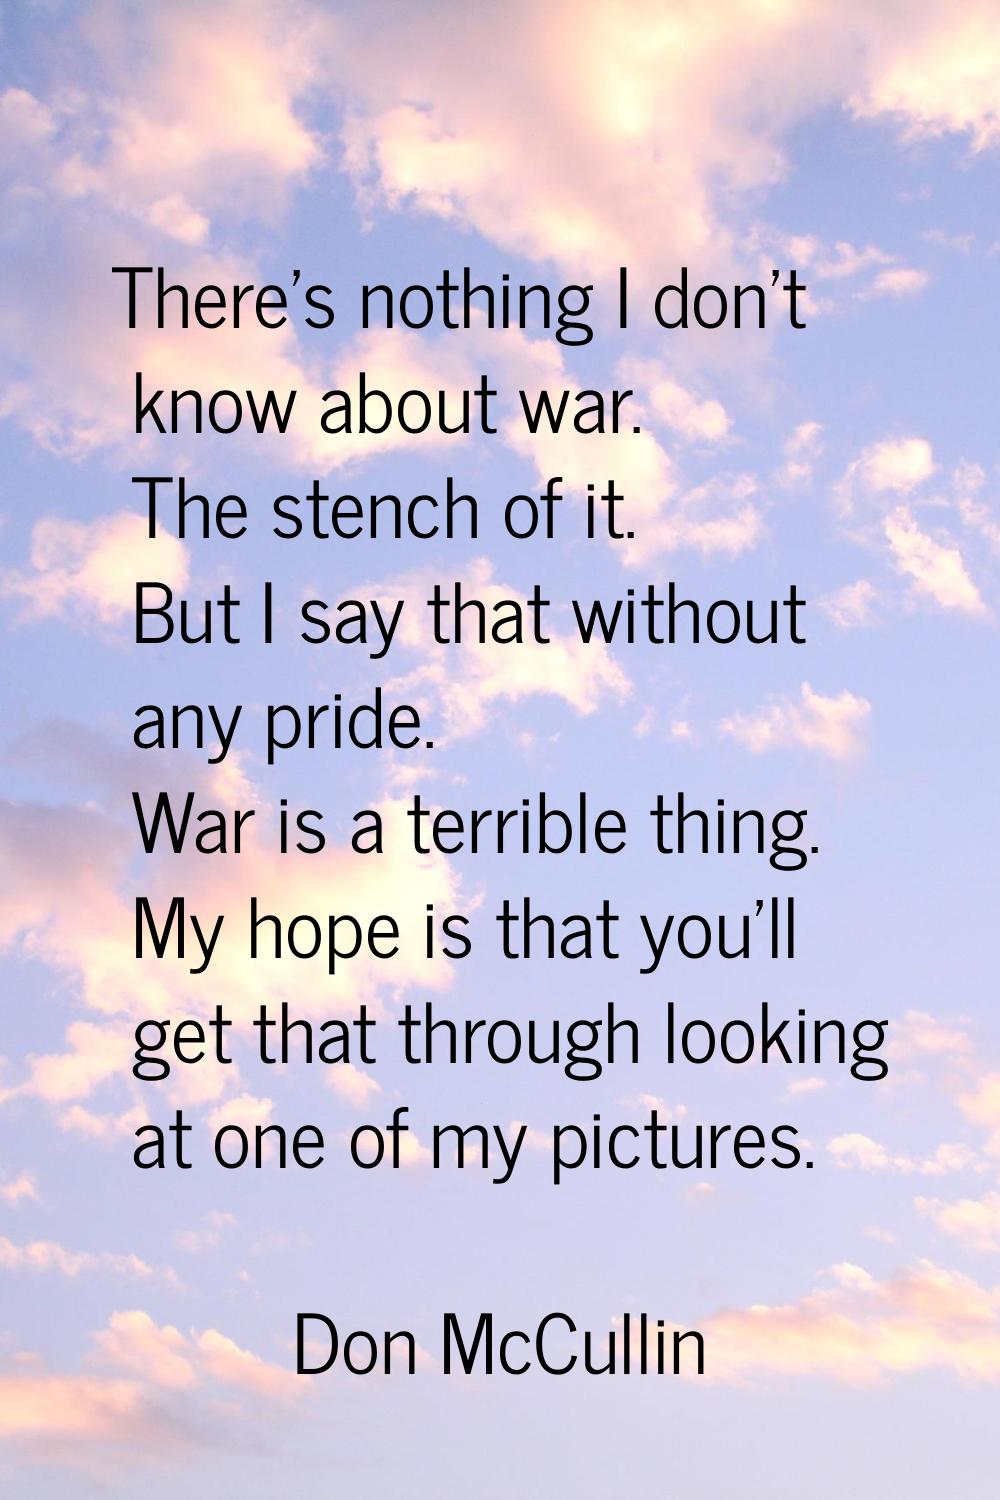 There's nothing I don't know about war. The stench of it. But I say that without any pride. War is 